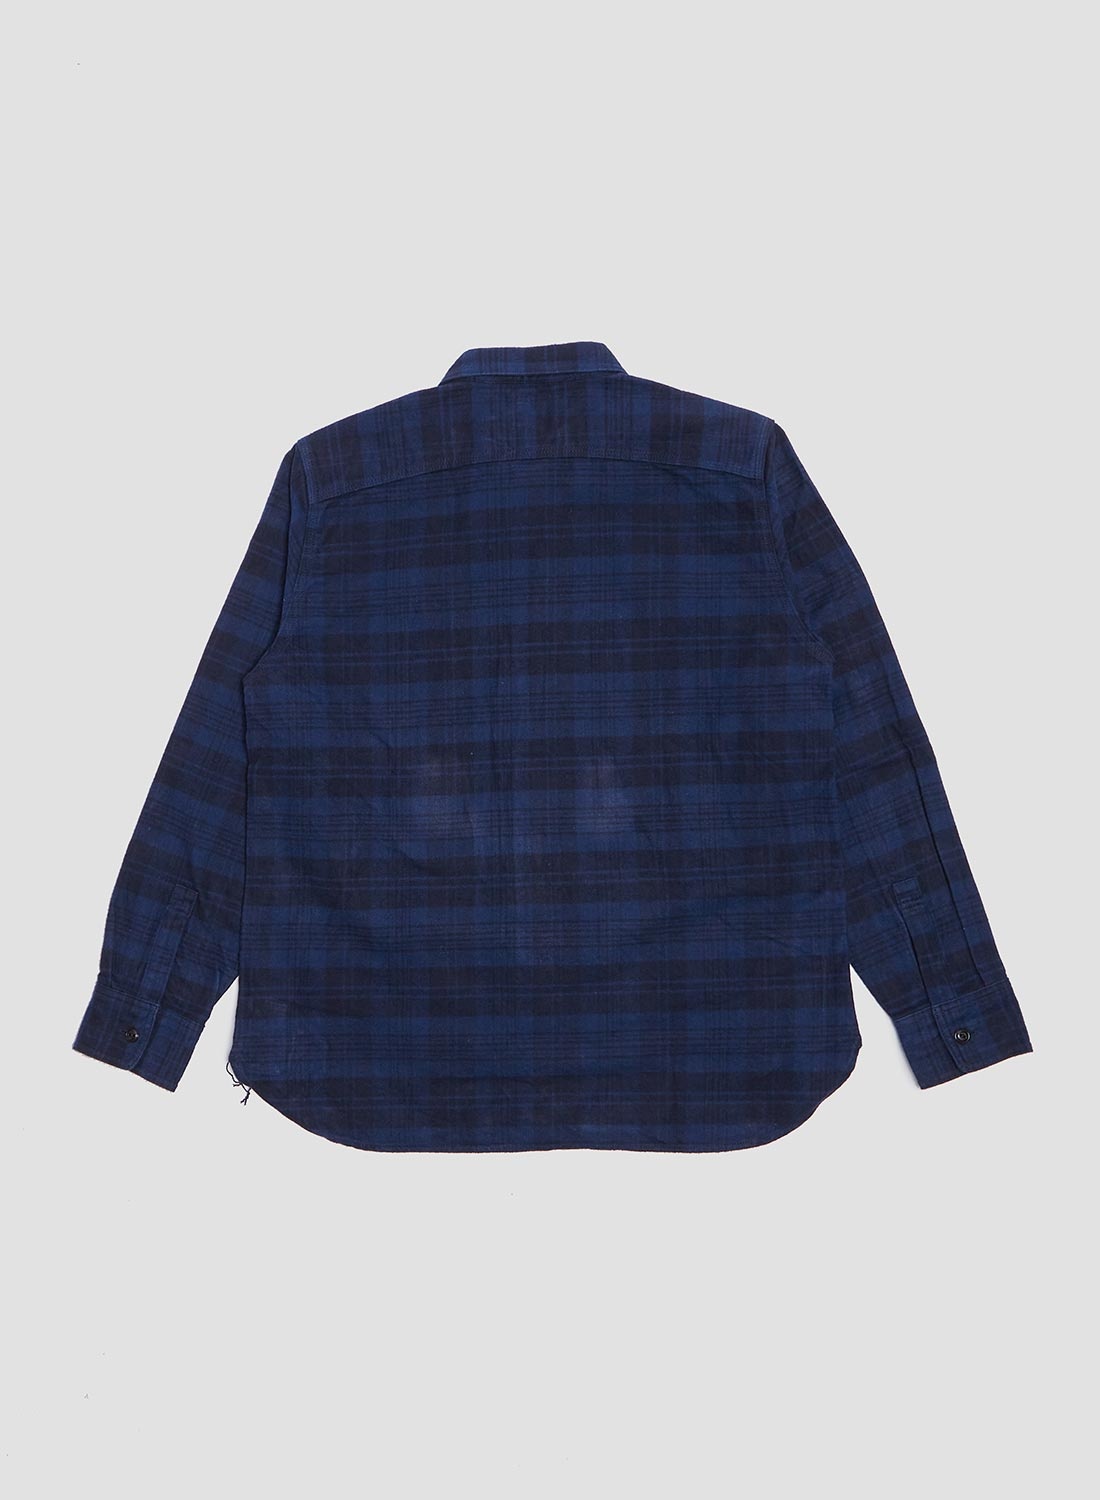 Nigel Cabourn FOB Factory Heavy Nel Work Shirt Navy | REVERSIBLE